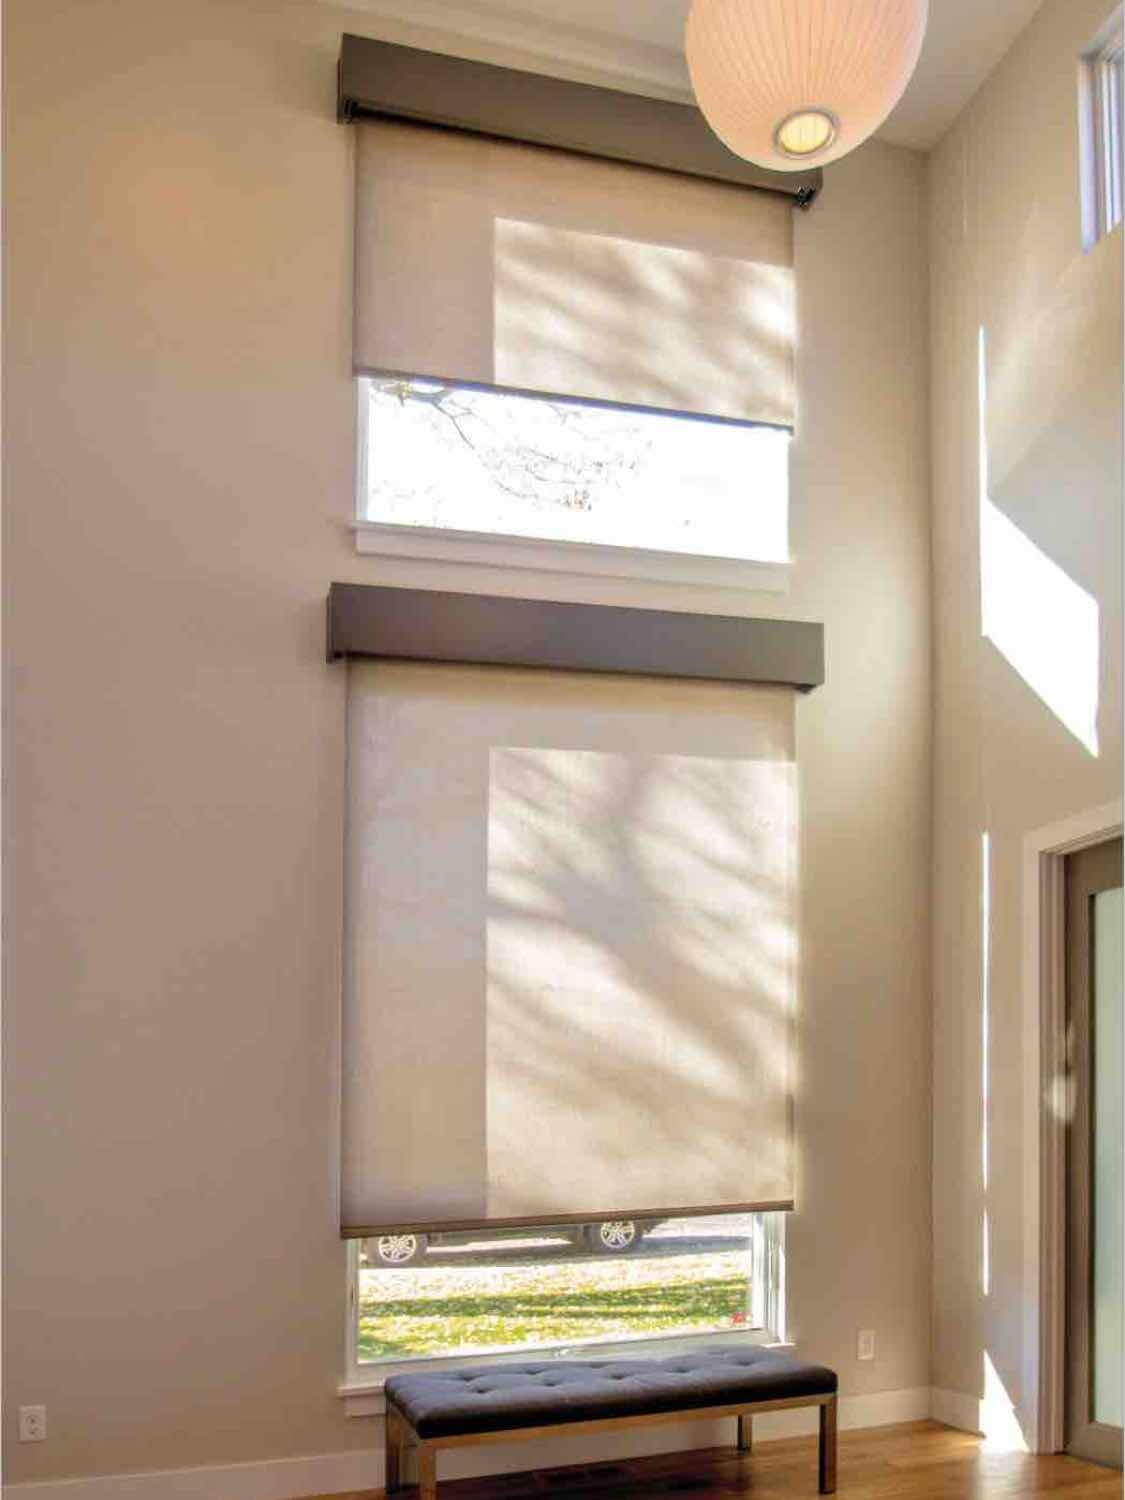 Motorized Window Blinds - Today’s Interiors